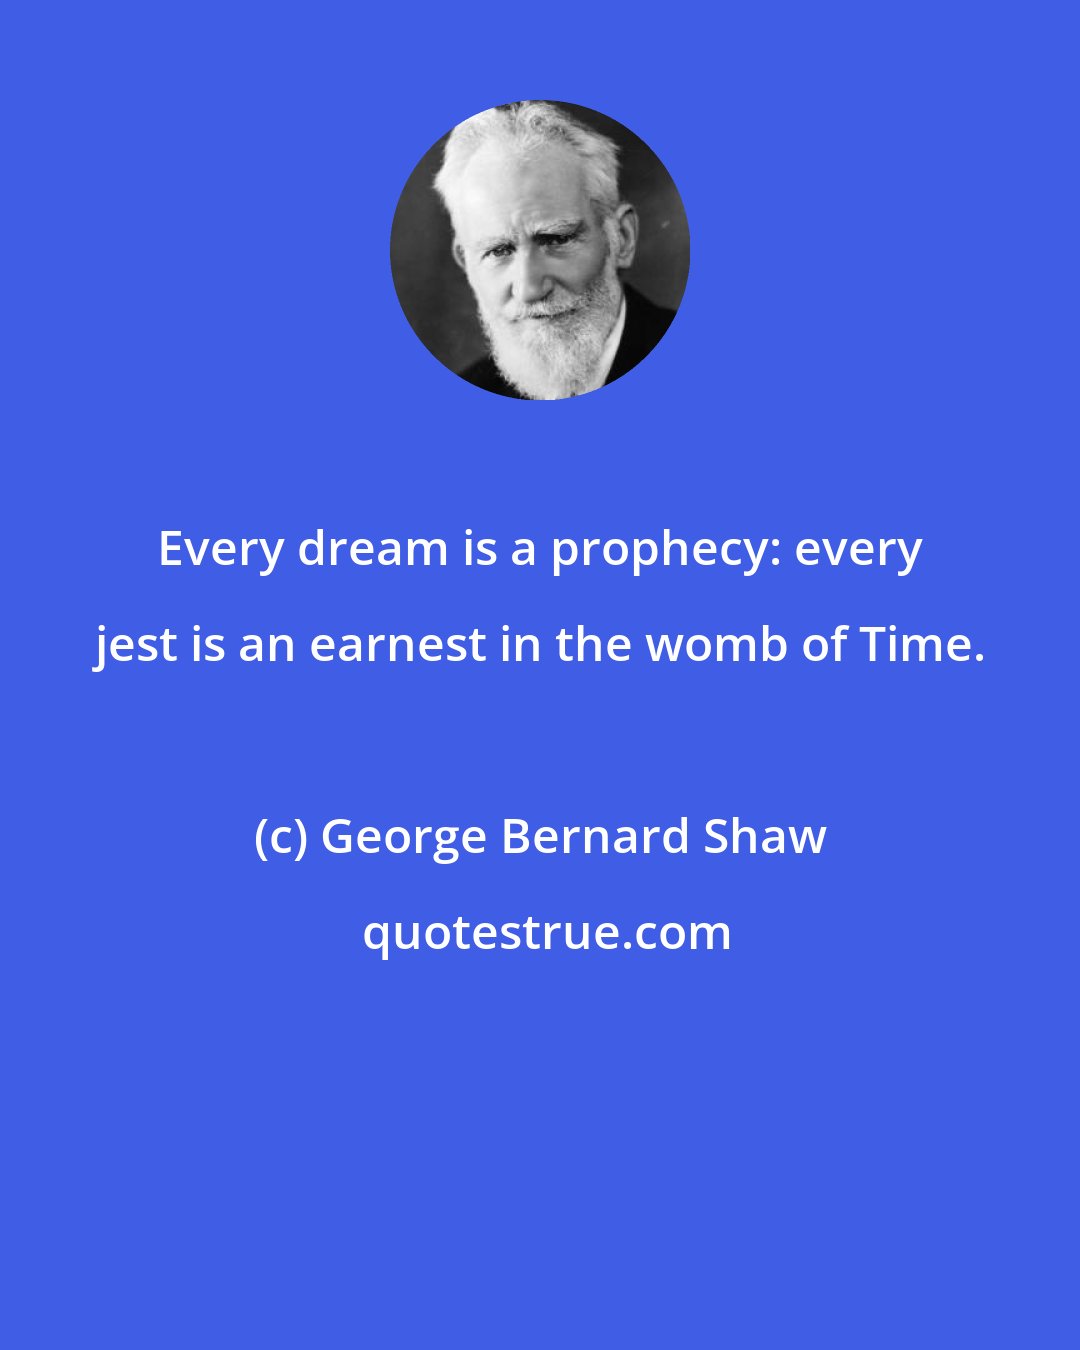 George Bernard Shaw: Every dream is a prophecy: every jest is an earnest in the womb of Time.